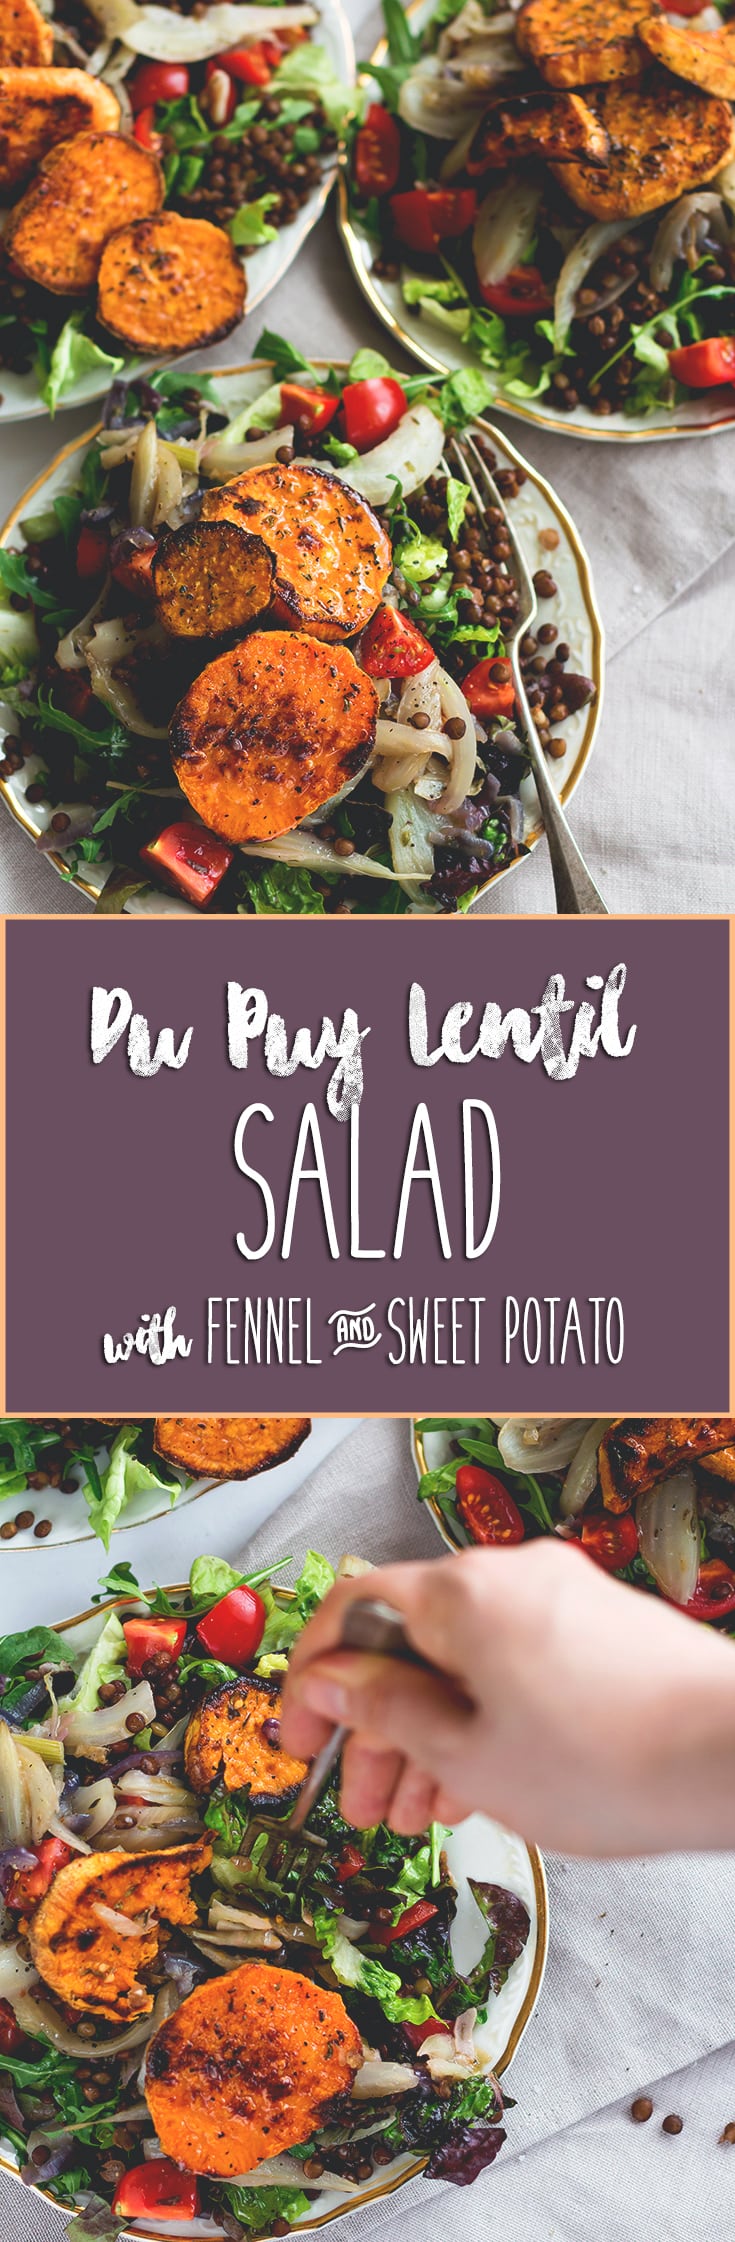 Du Puy Lentil Salad with Fennel and Sweet Potatoes - we LOVE this recipe! It's filling, flavorful, vegan, and really easy to make. Du Puy lentils have a nutty flavor and combined with the sweet potatoes and fennel it's absolutely devine! | thehealthfulideas.com